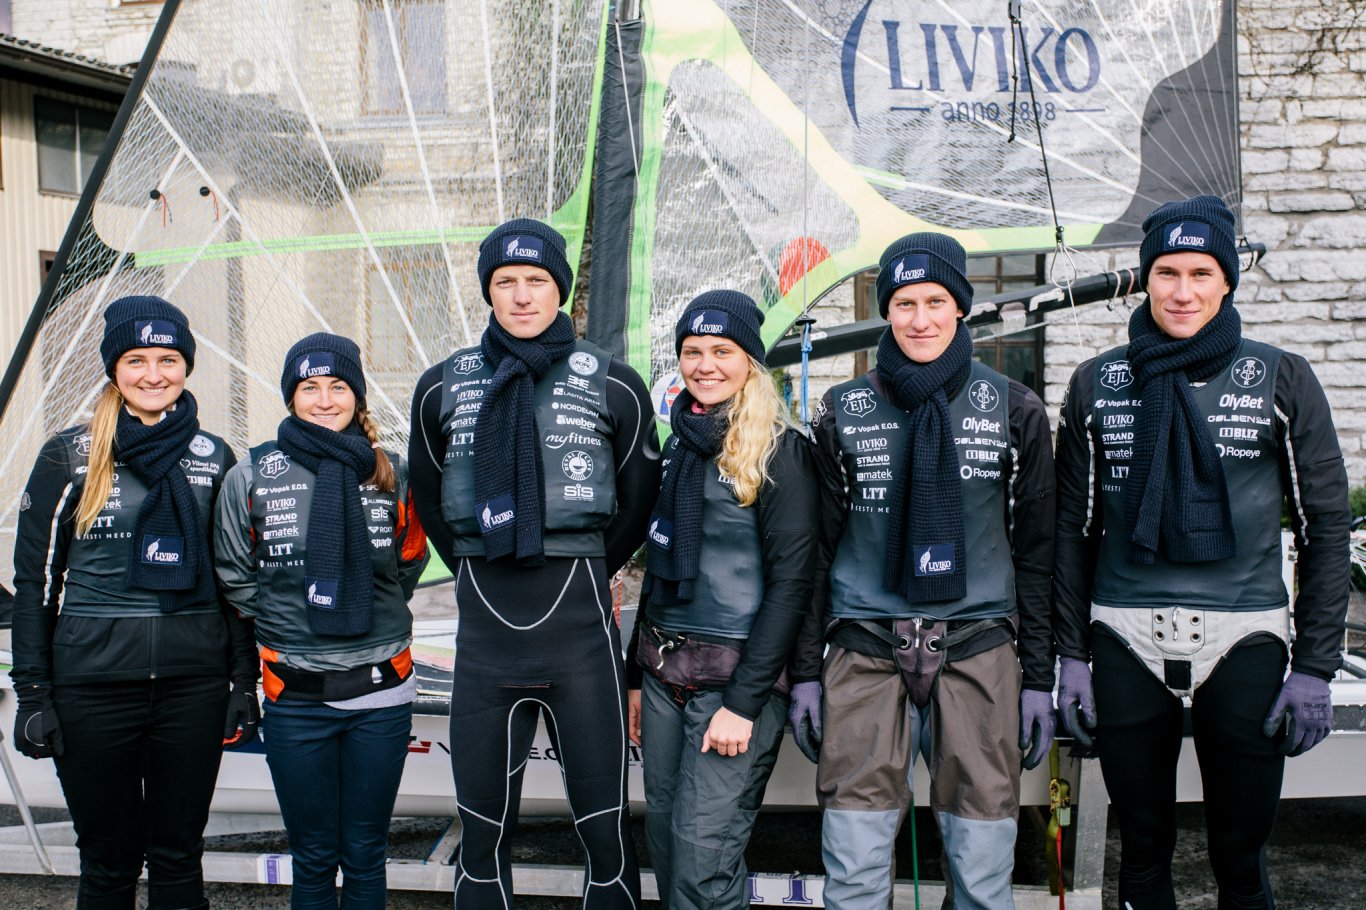 LIVIKO BREATHES WIND INTO OLYMPIC SAILS AND SUPPORTS YOUNG SAILING ATHLETES